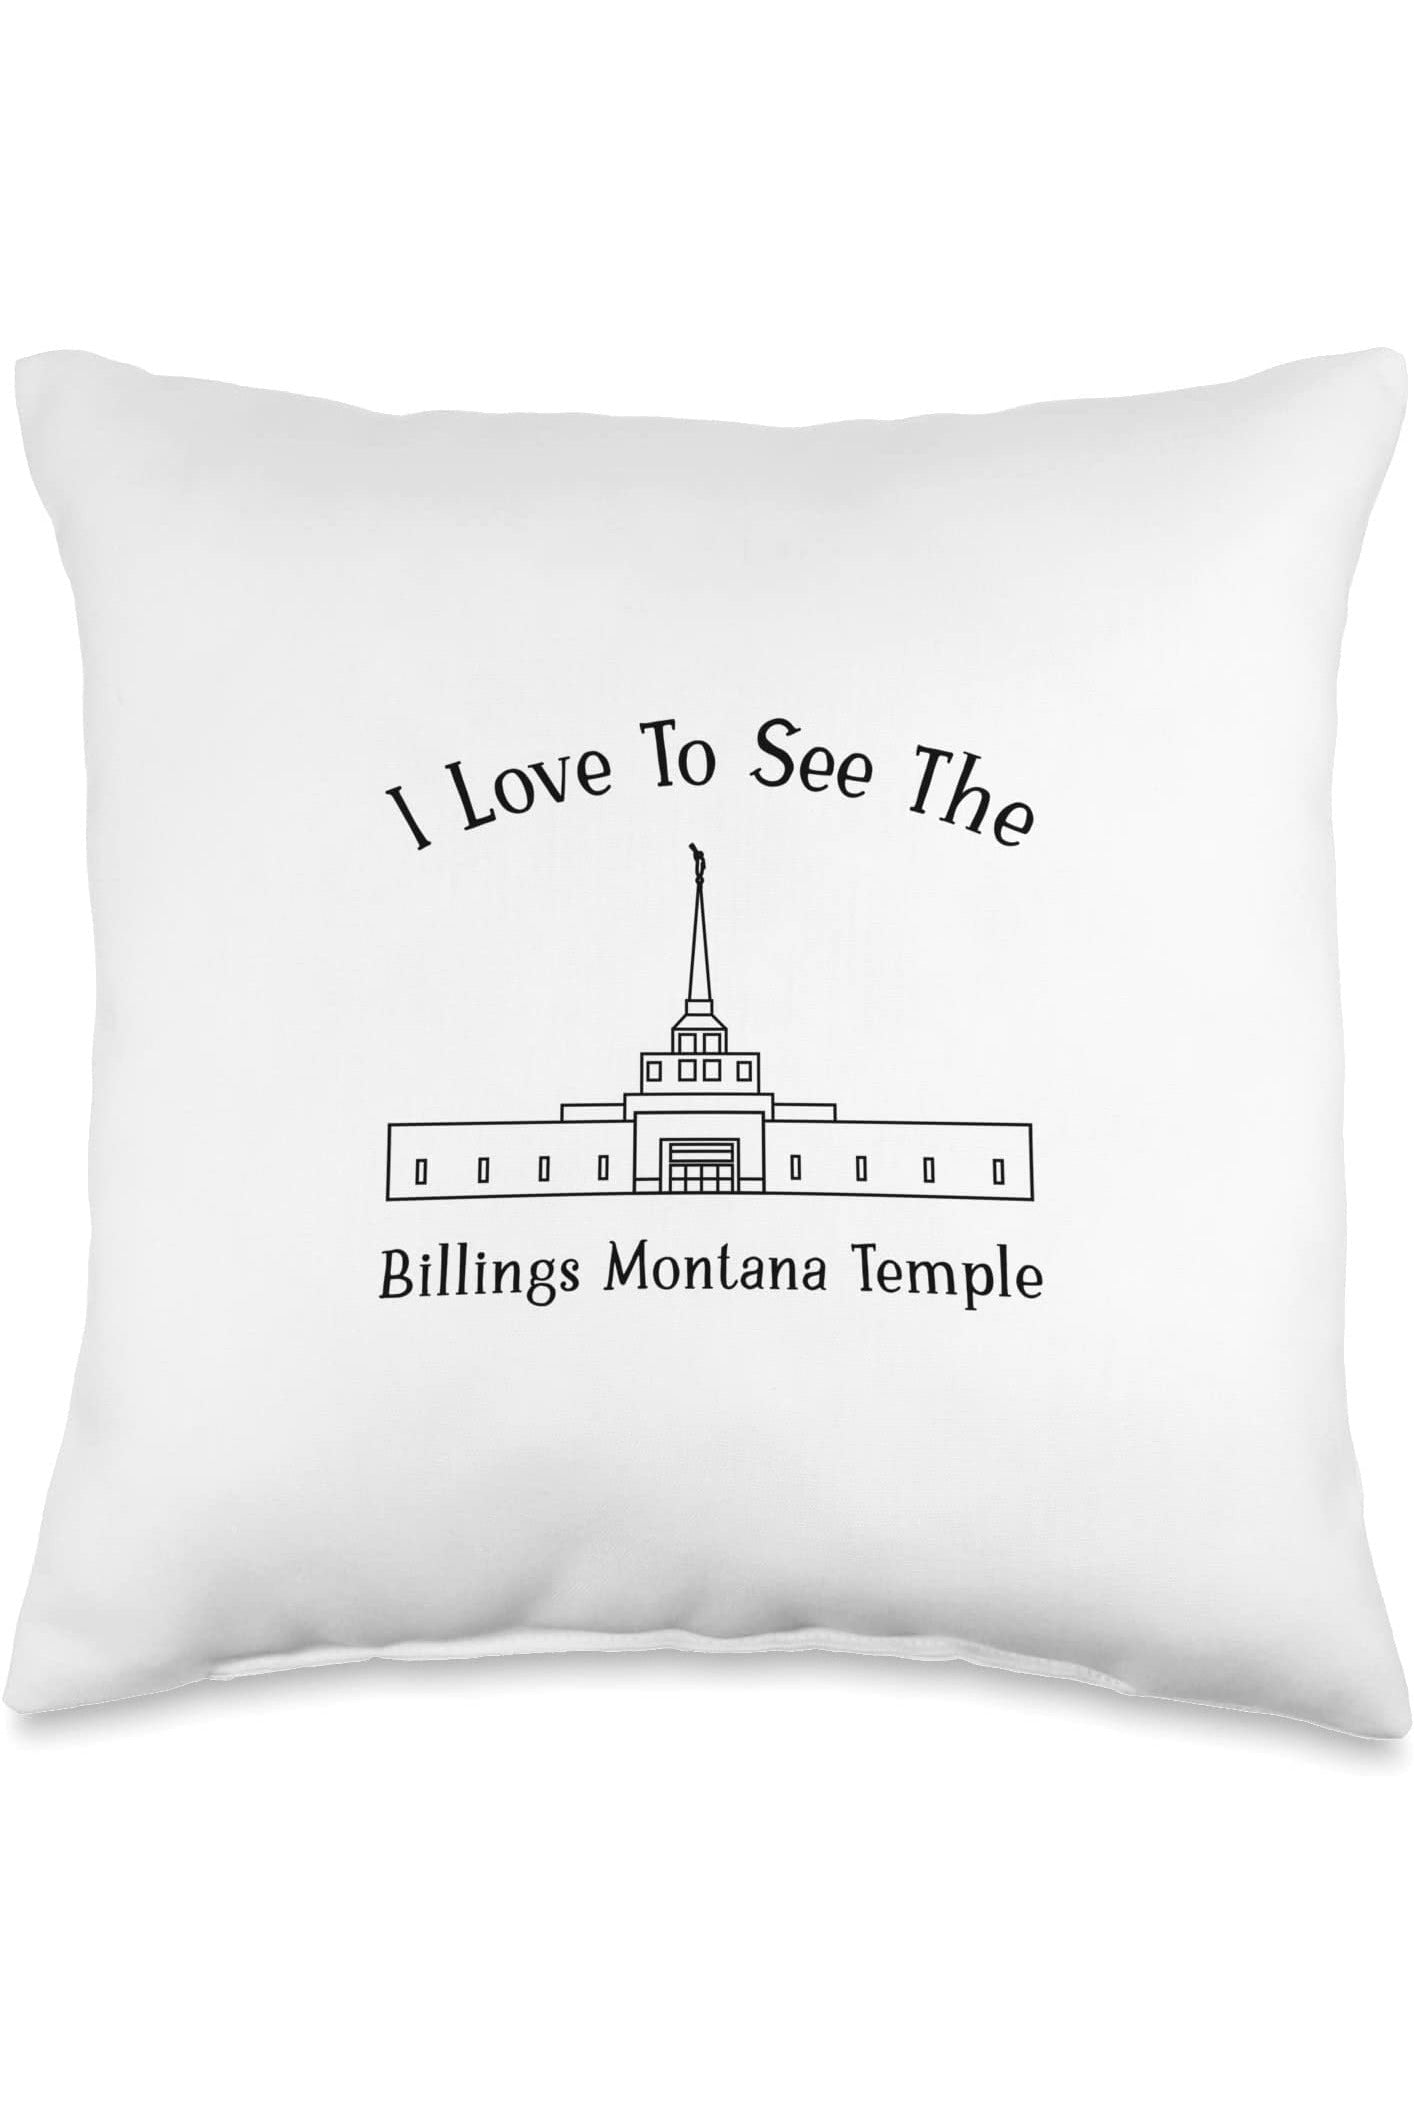 Billings Montana Temple Throw Pillows - Happy Style (English) US